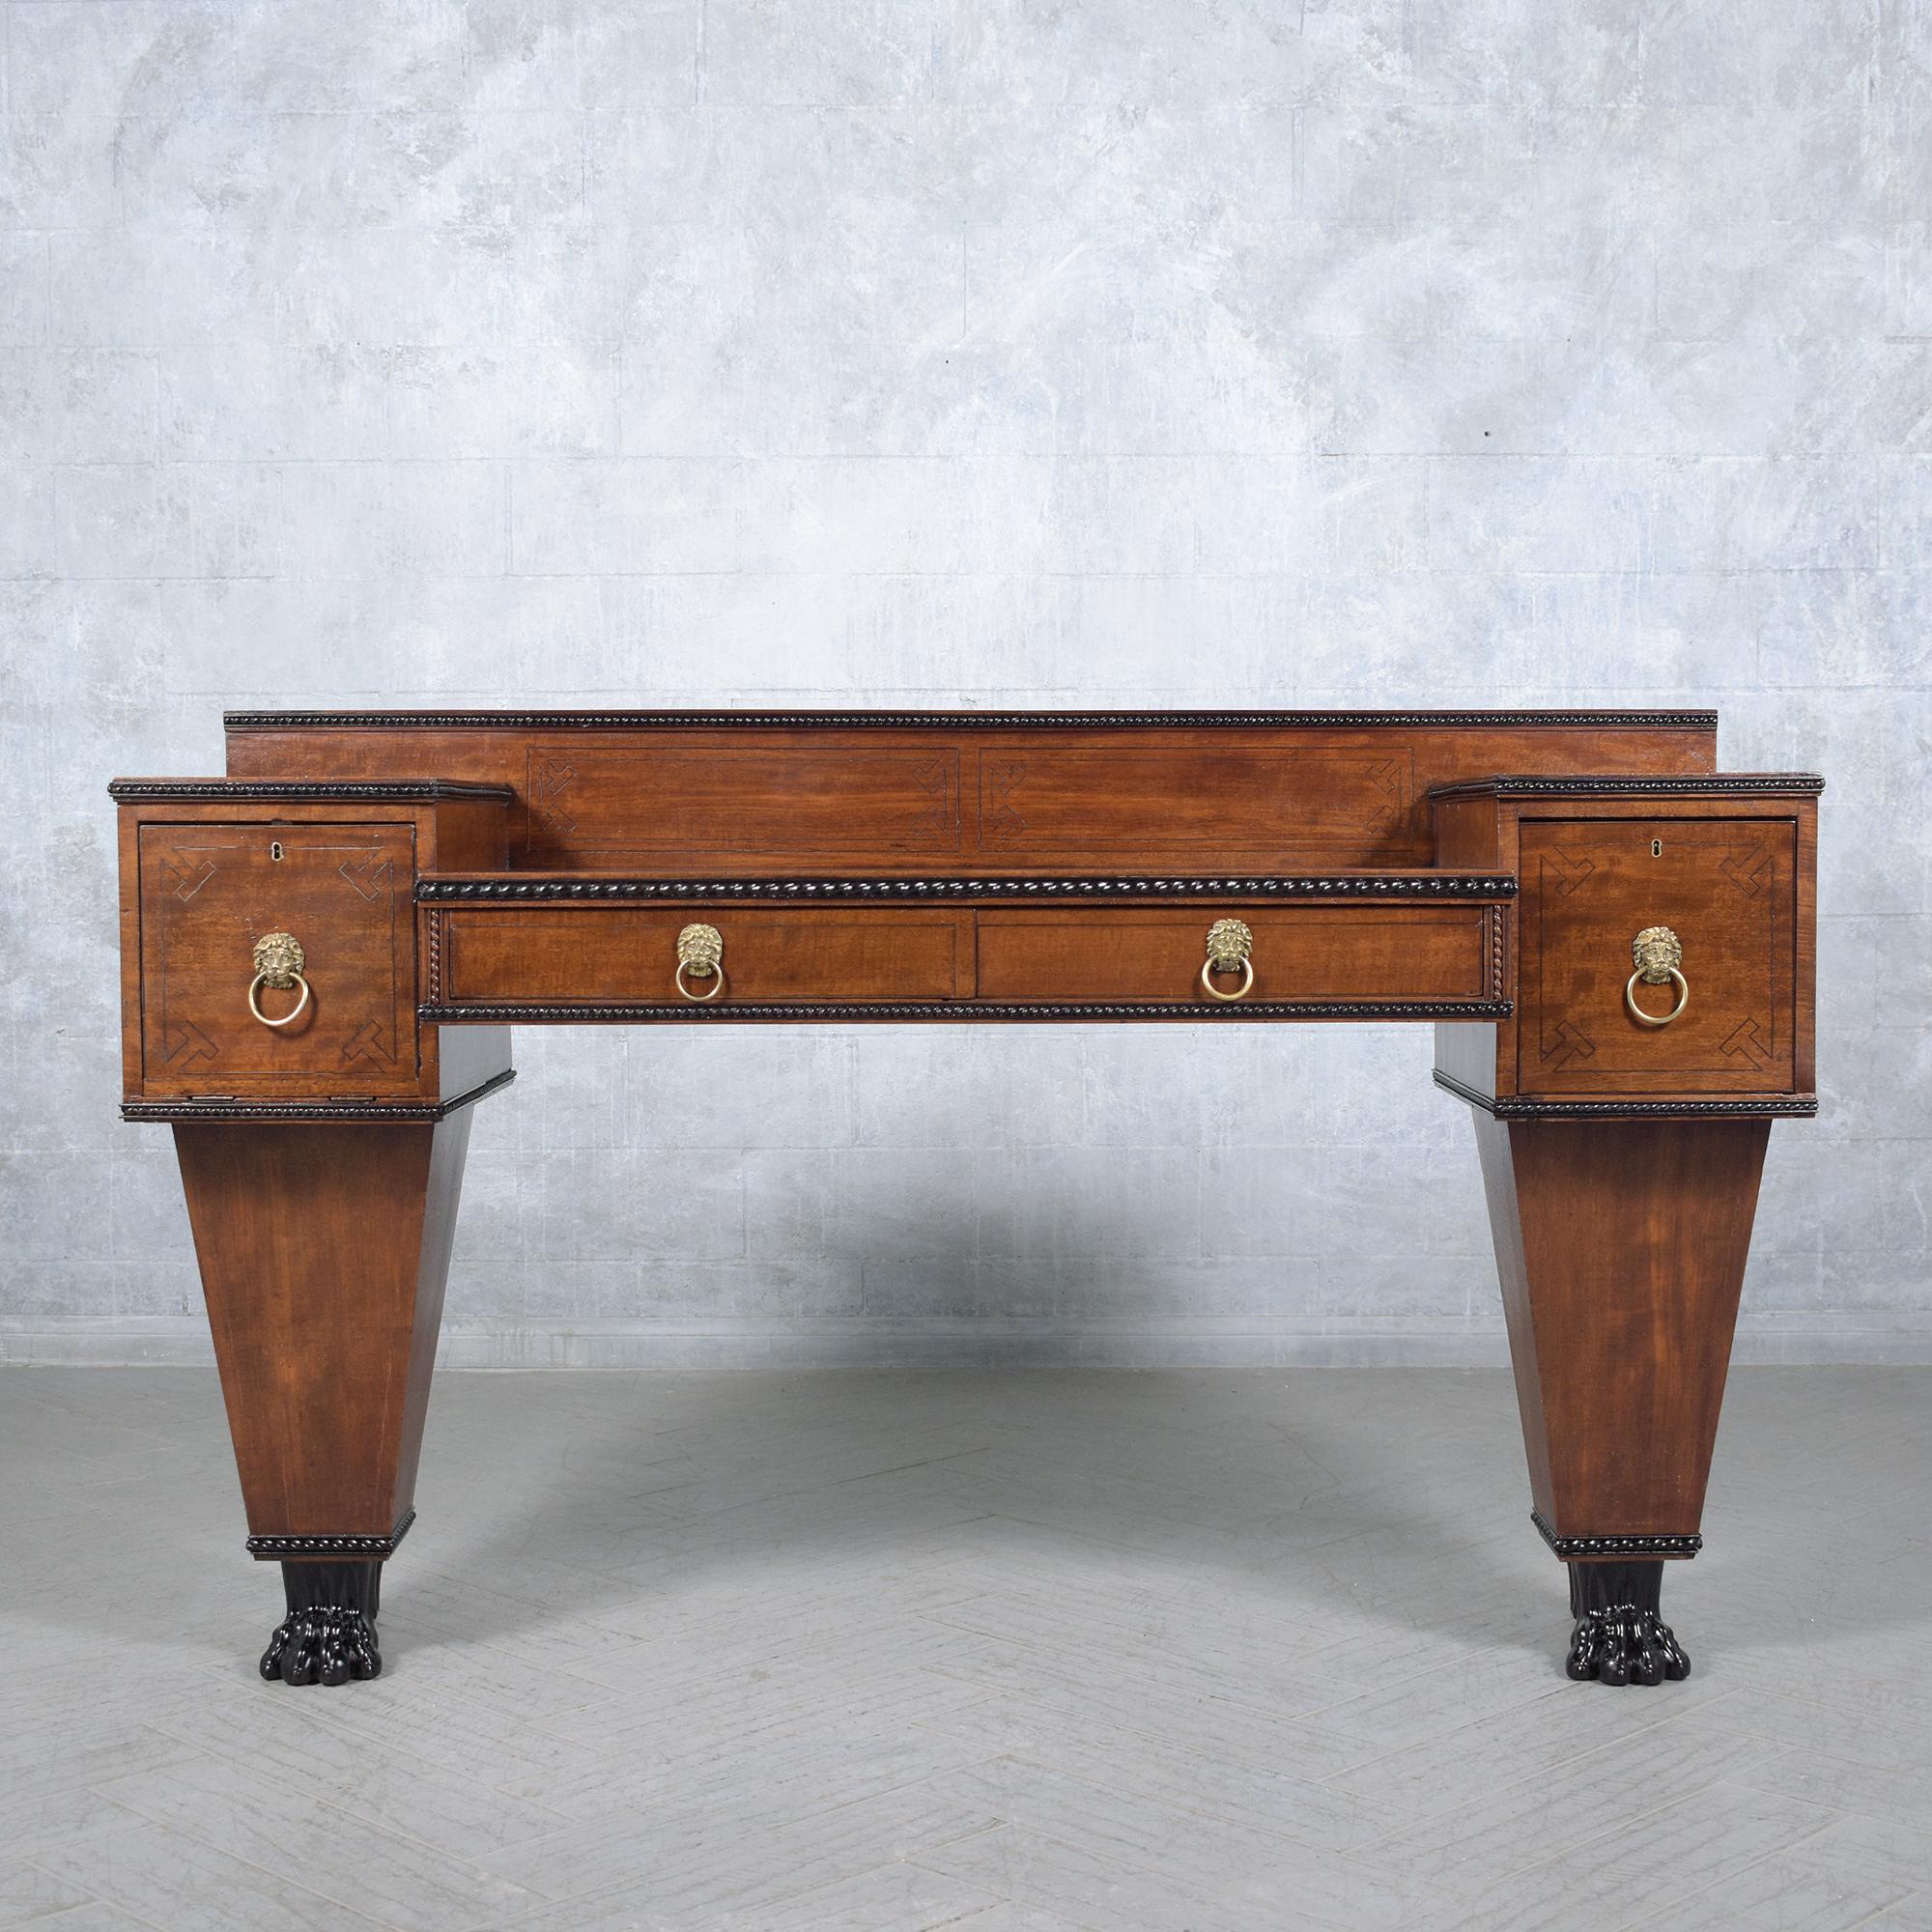 Discover the grandeur of the late 19th century with our George IV sideboard, a testament to exceptional craftsmanship, beautifully executed in exquisite mahogany wood. Meticulously restored by our in-house team of professional craftsmen, this unique